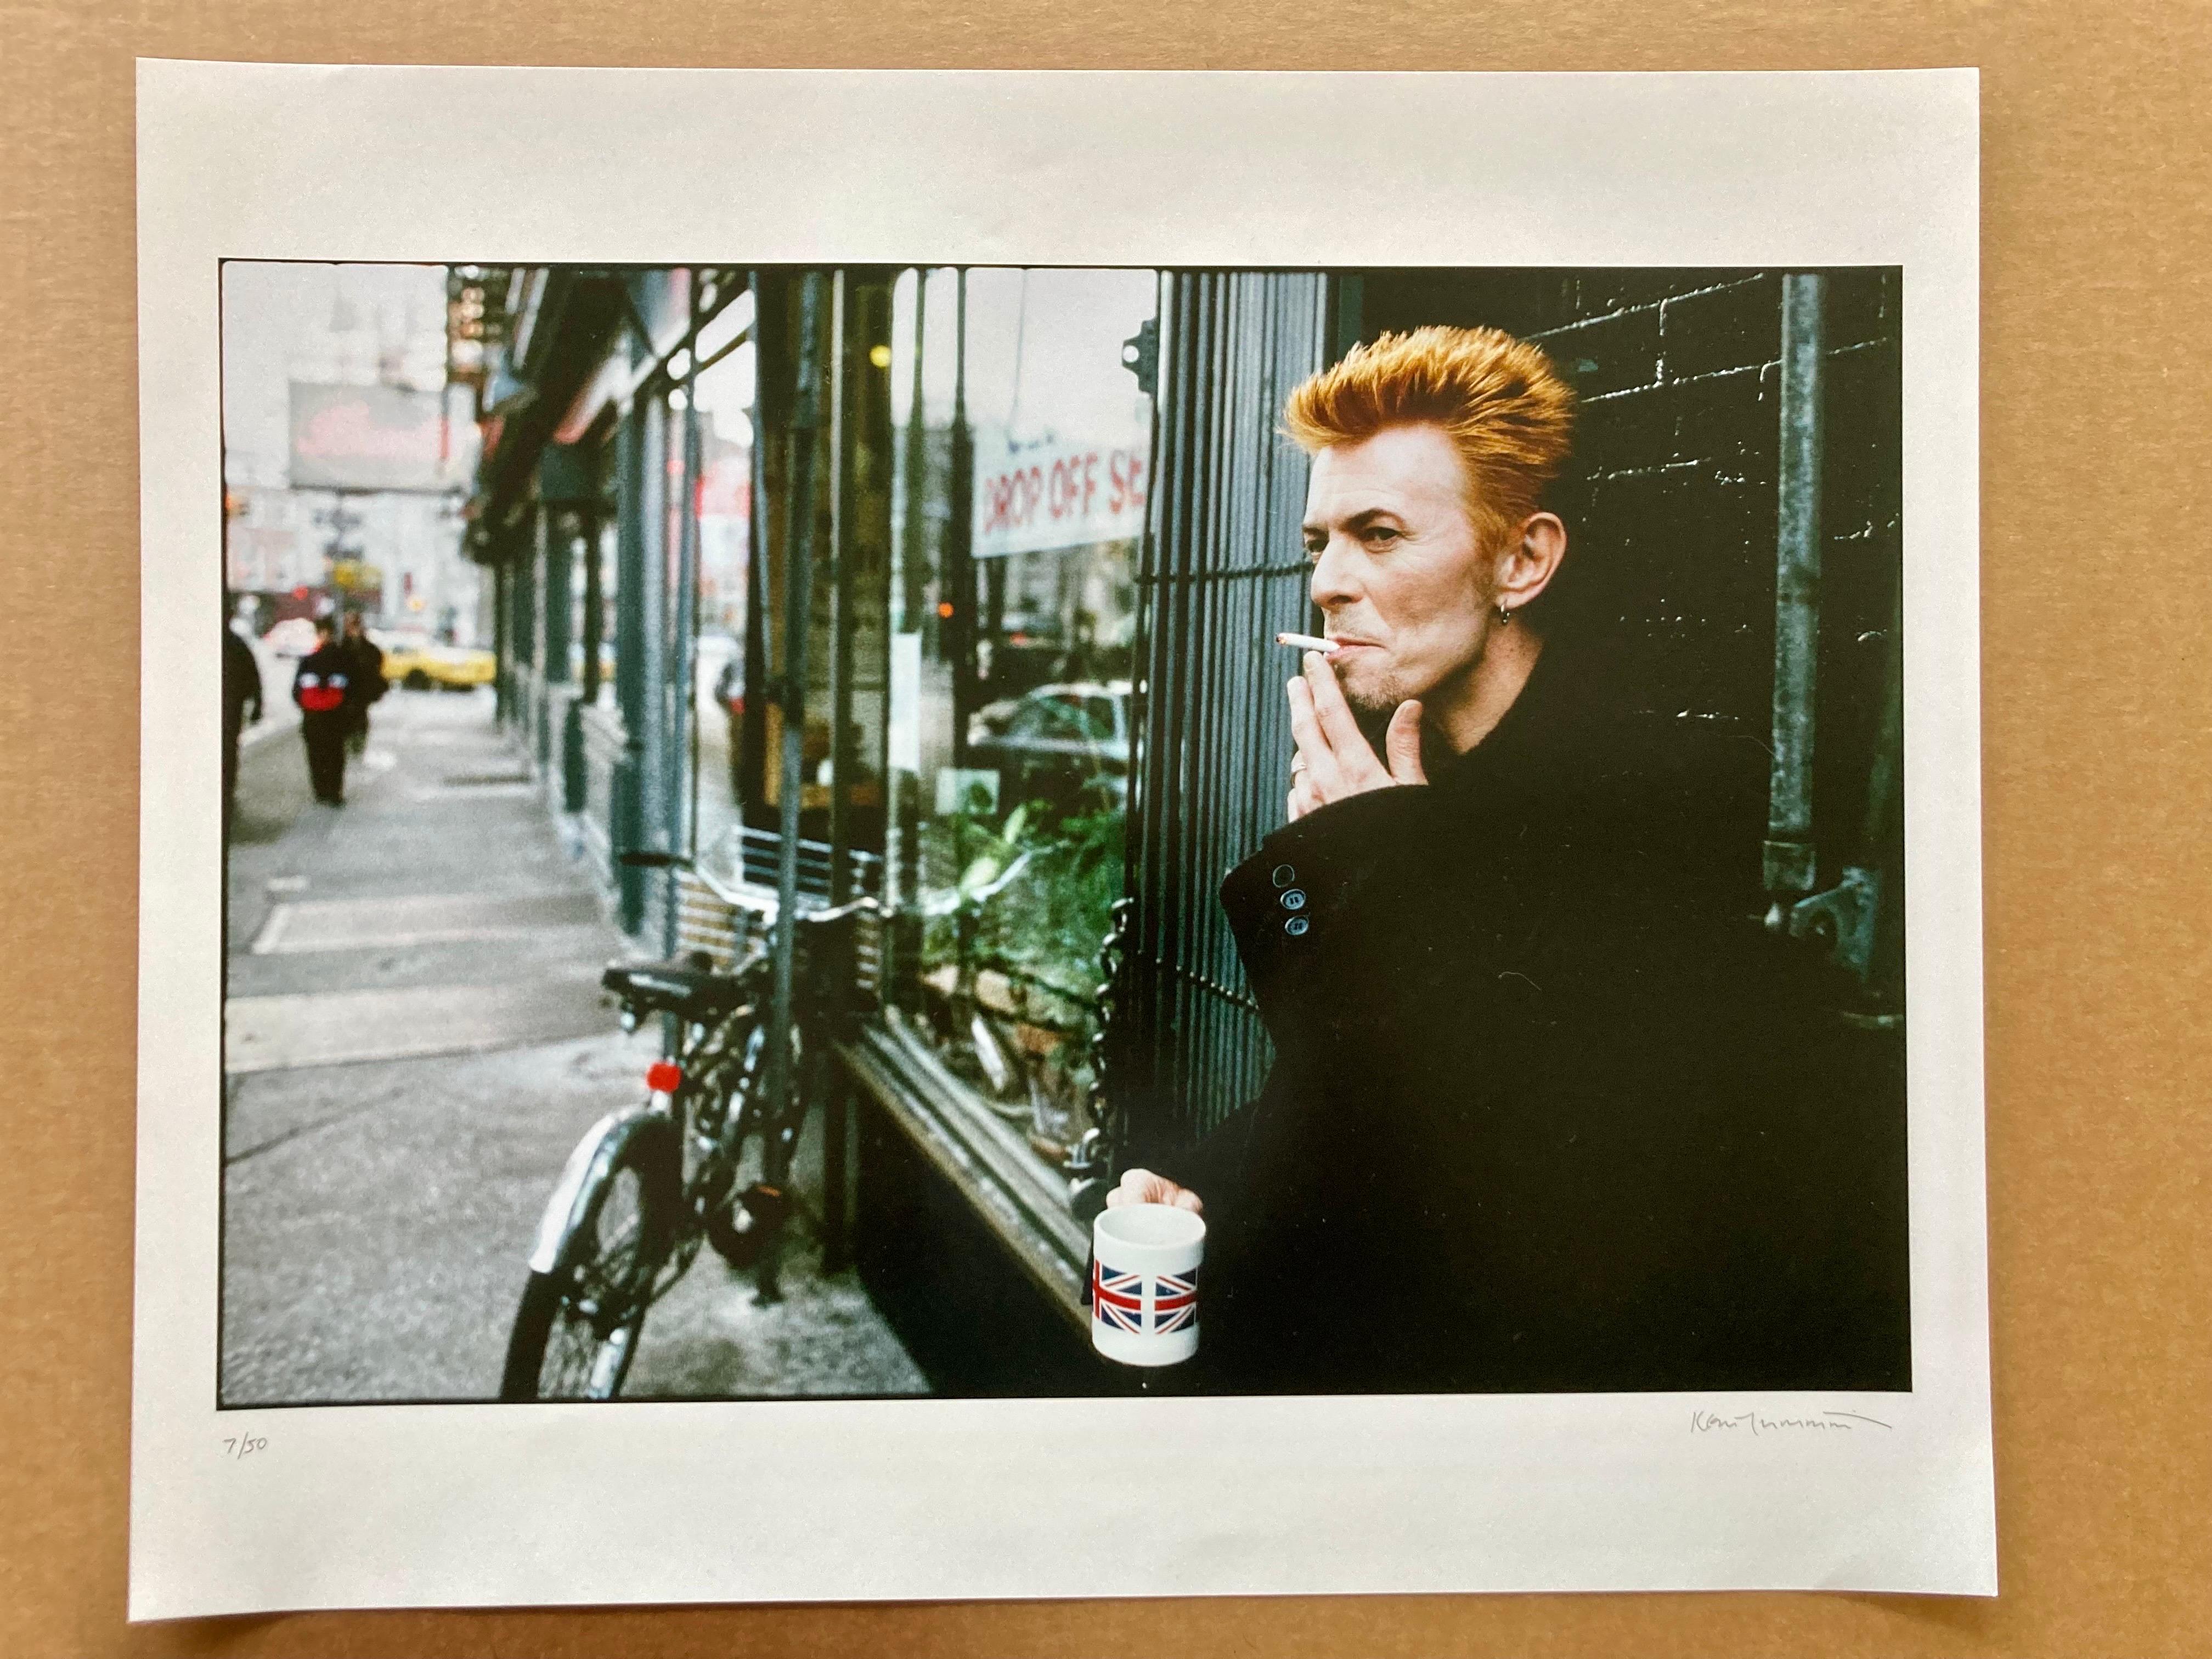 David Bowie Tea and Sympathy New York City - Photograph by Kevin Cummins